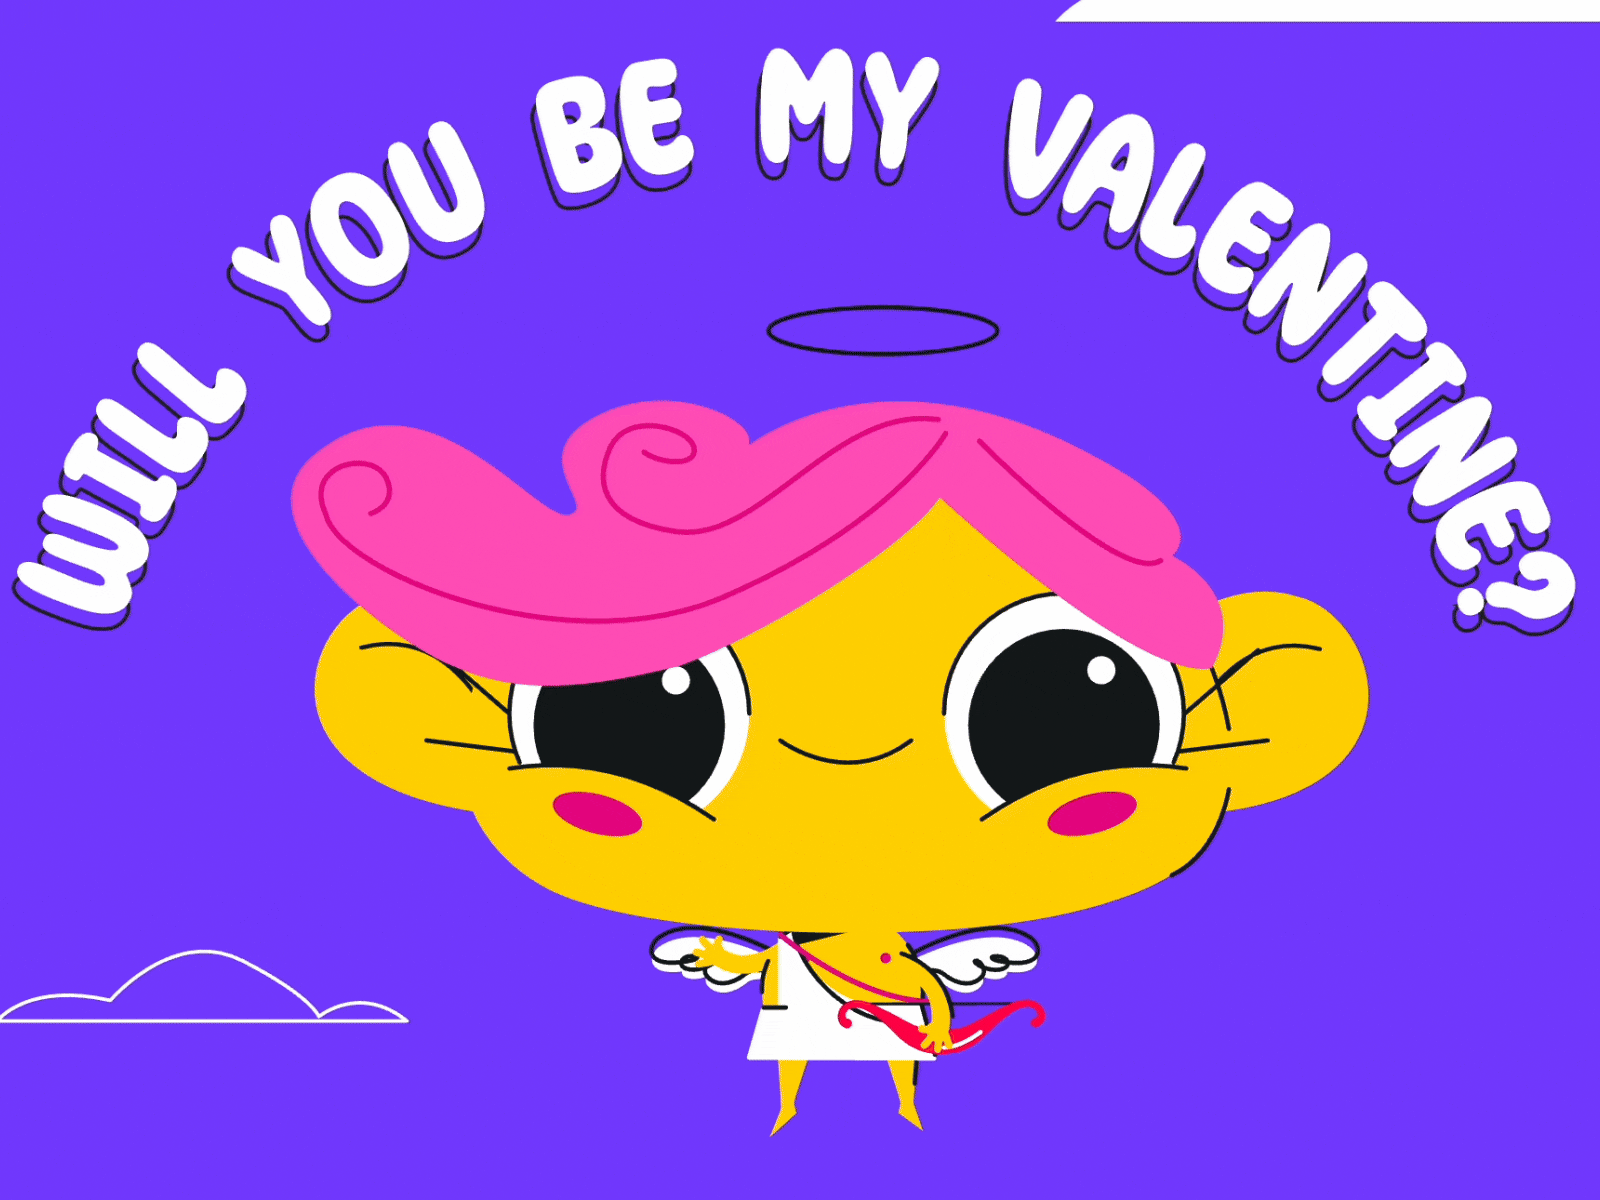 Rive, will you be my valentine? angel animation cartoon character design cute illustration interaction interactive kids love motion rive valentines